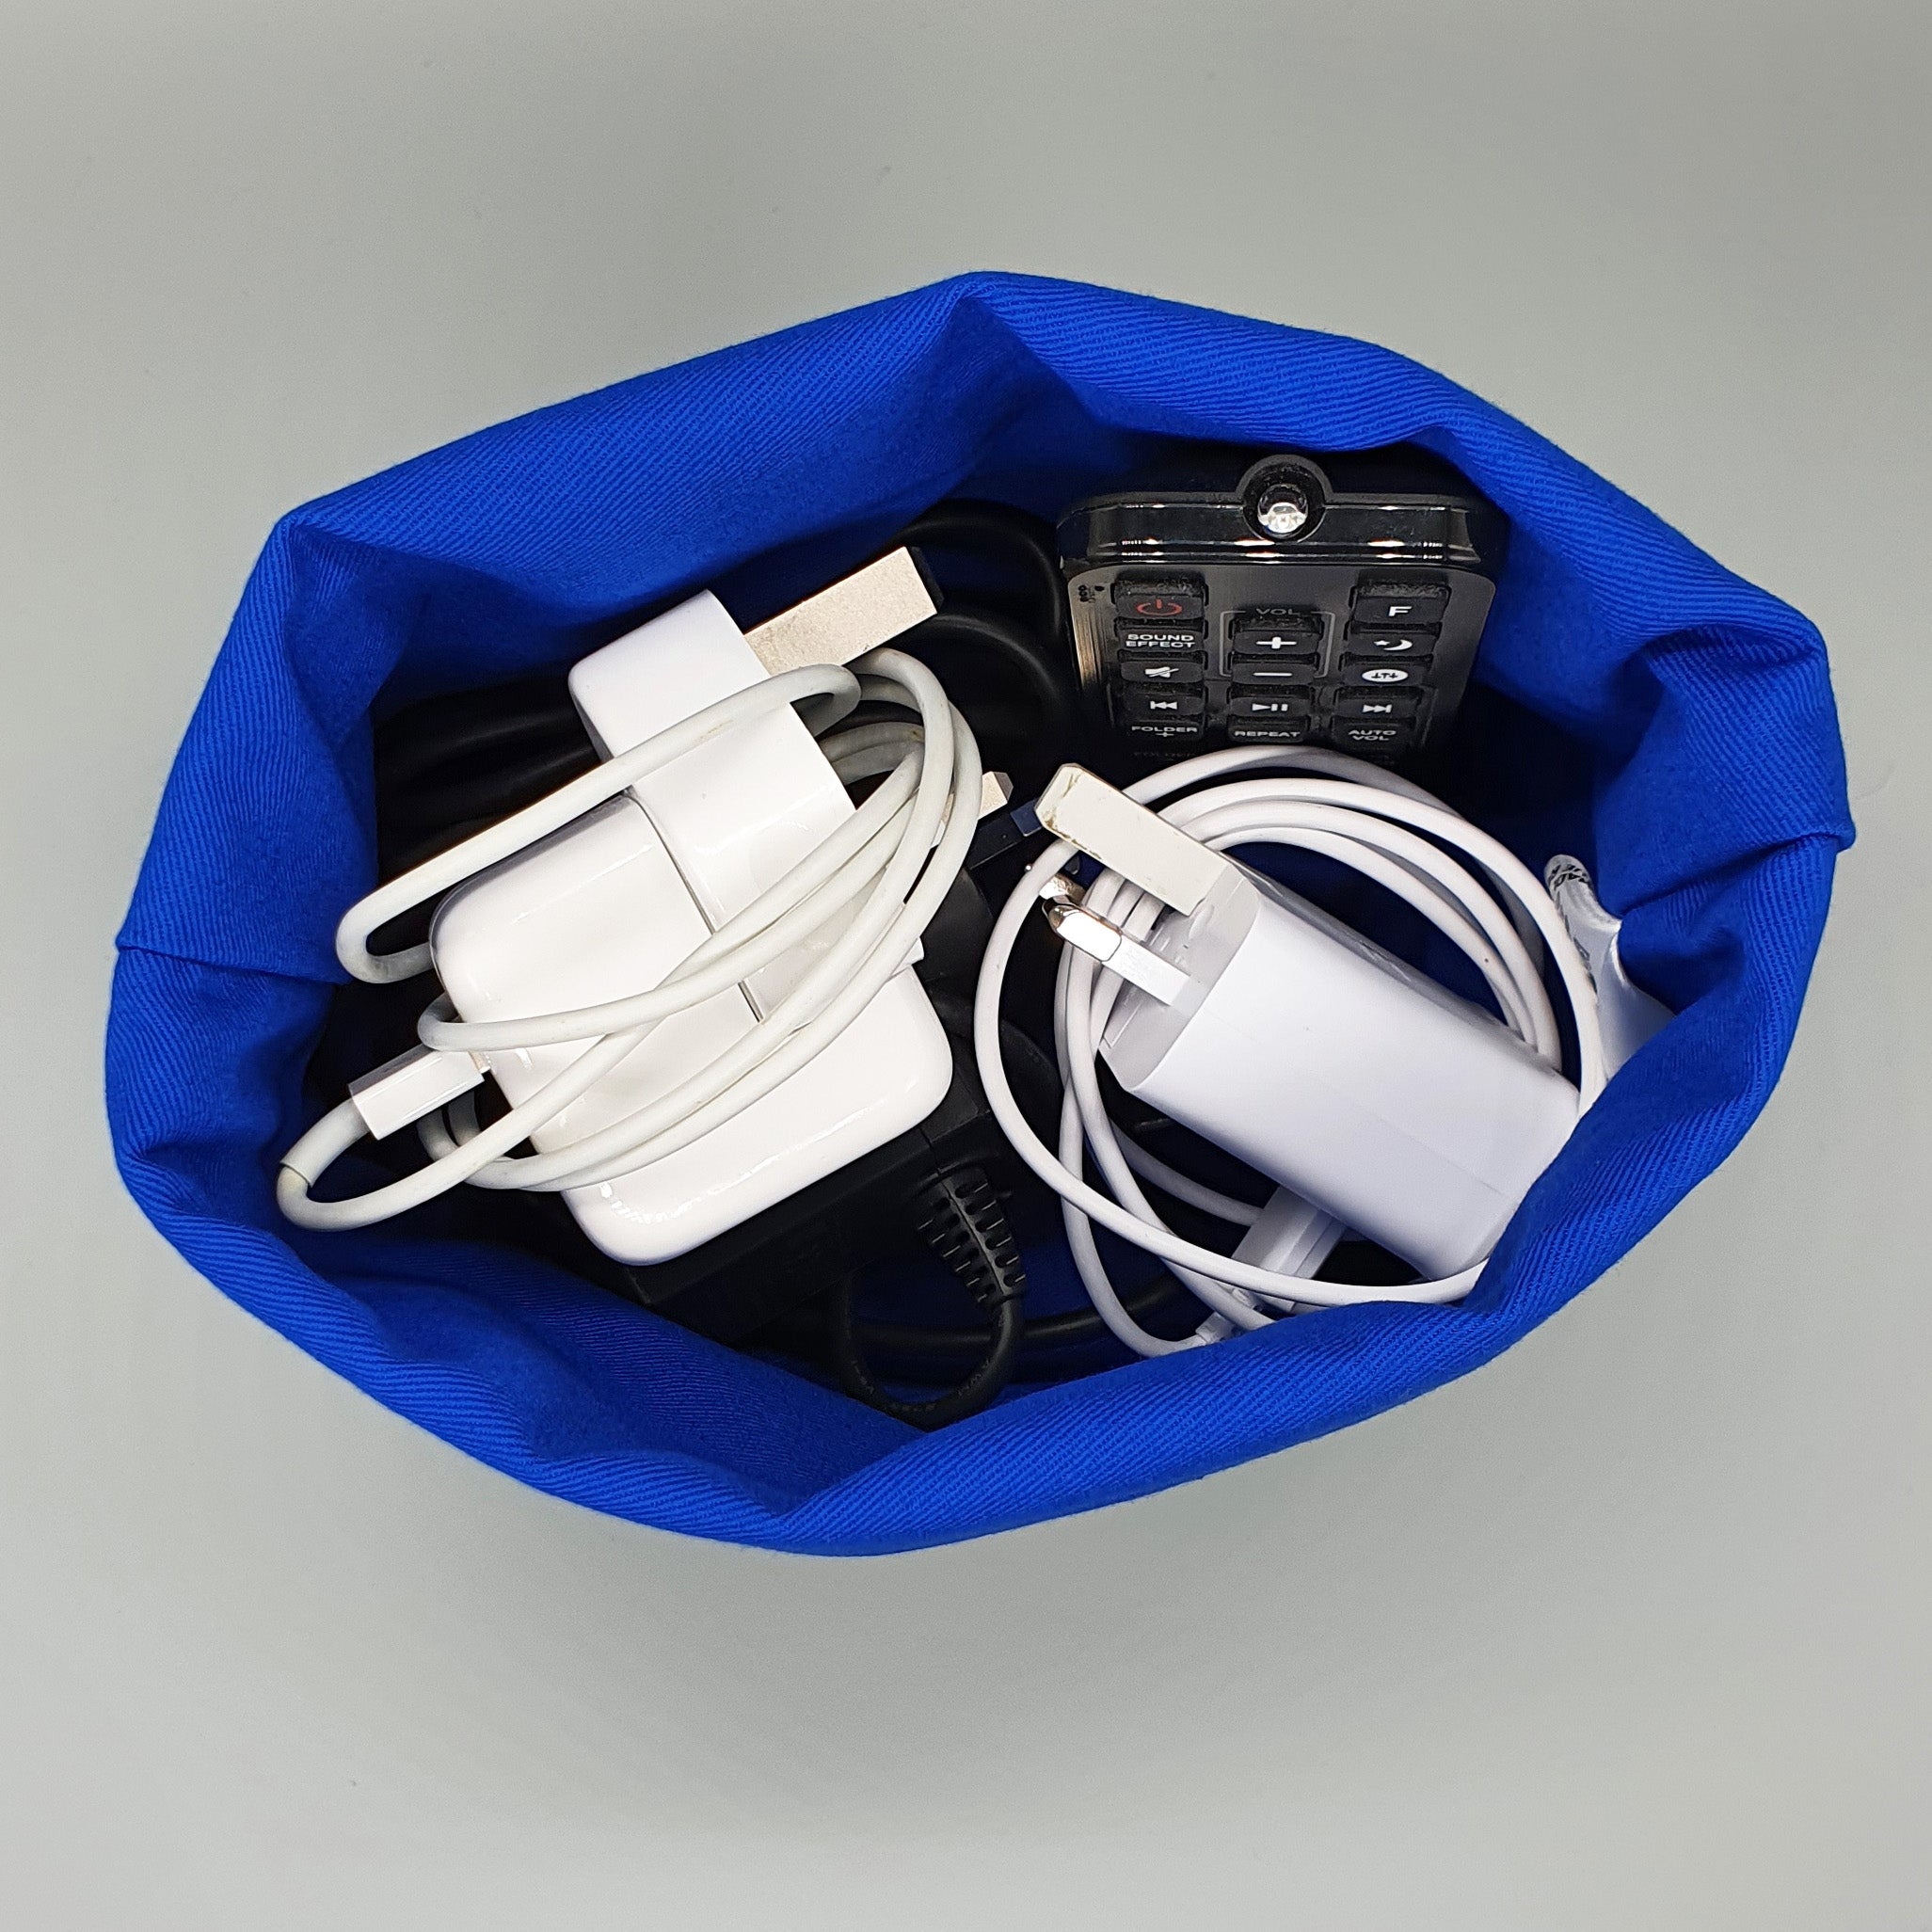 Westie storage basket with chargers